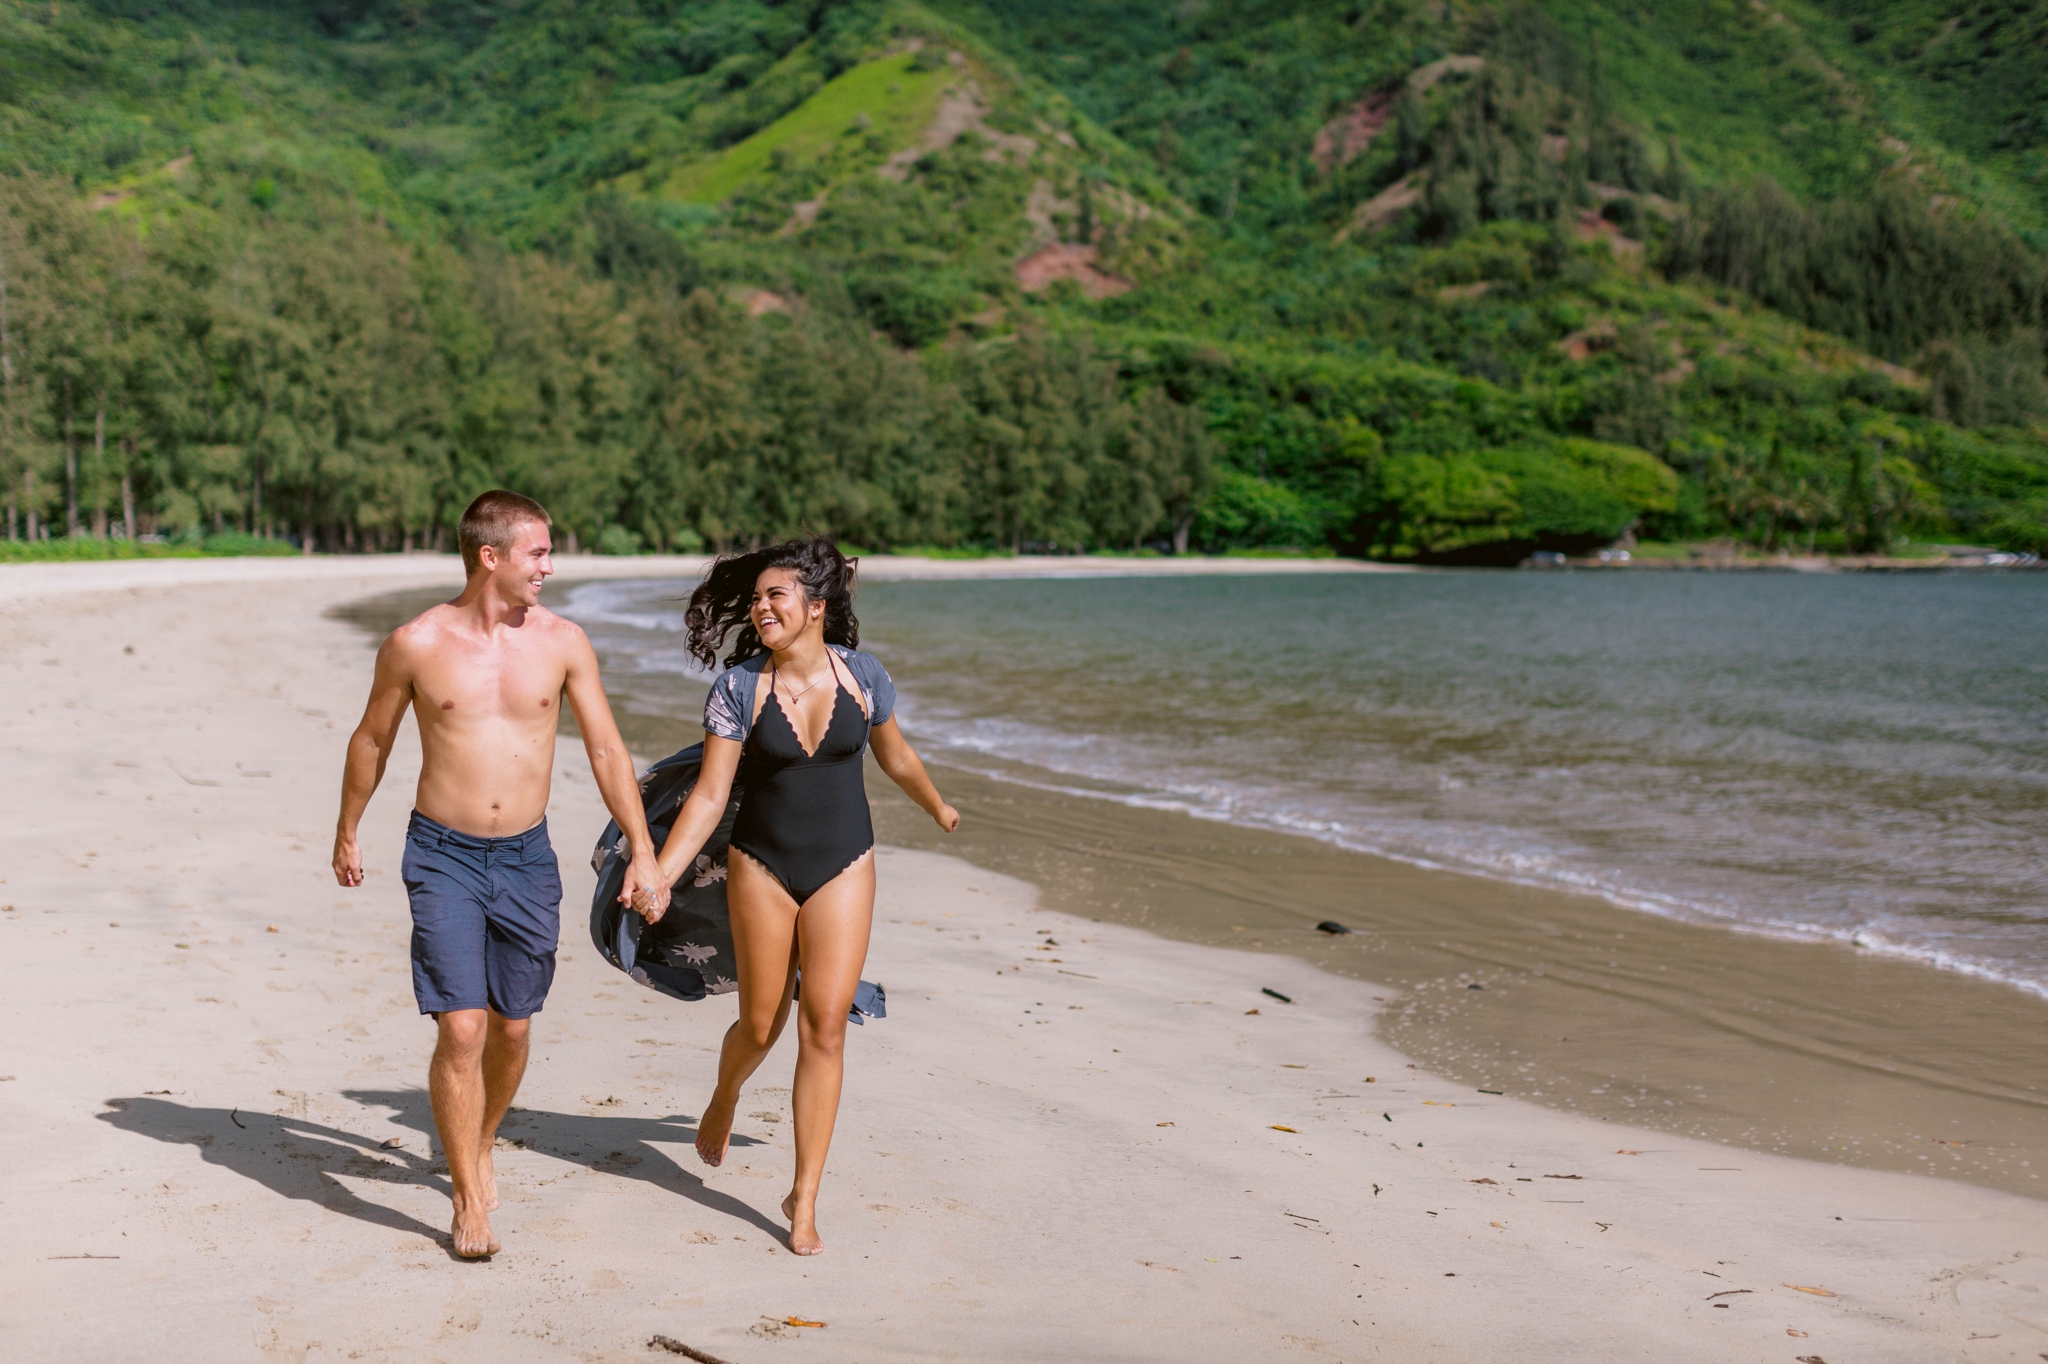  Couple running in their bathing suits - Rilee + Max - Beach Engagement Session at Kahana Bay in Kaaawa, HI - Oahu Hawaii Wedding Photographer - #hawaiiengagementphotographer #oahuengagementphotographer 